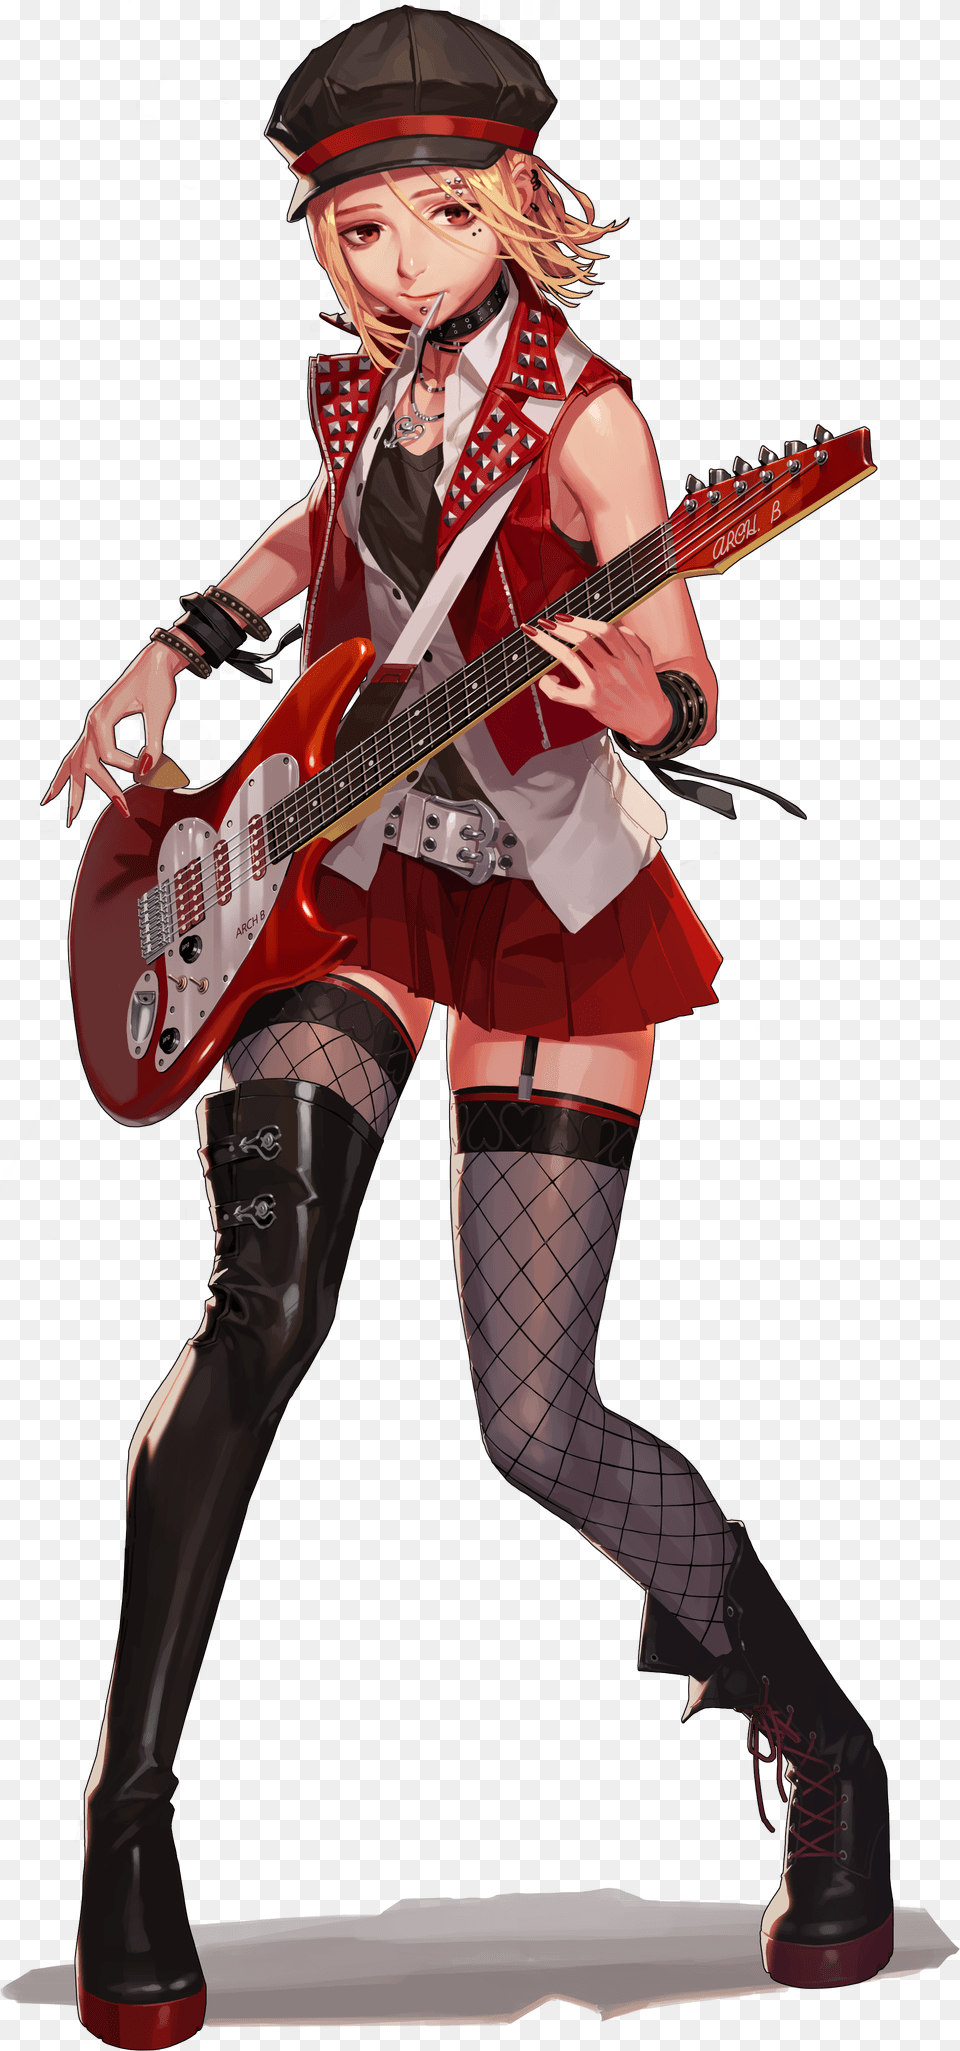 Black Survival Is A Point And Click Real Time Survival Black Survival Characters, Adult, Person, Musical Instrument, Guitar Png